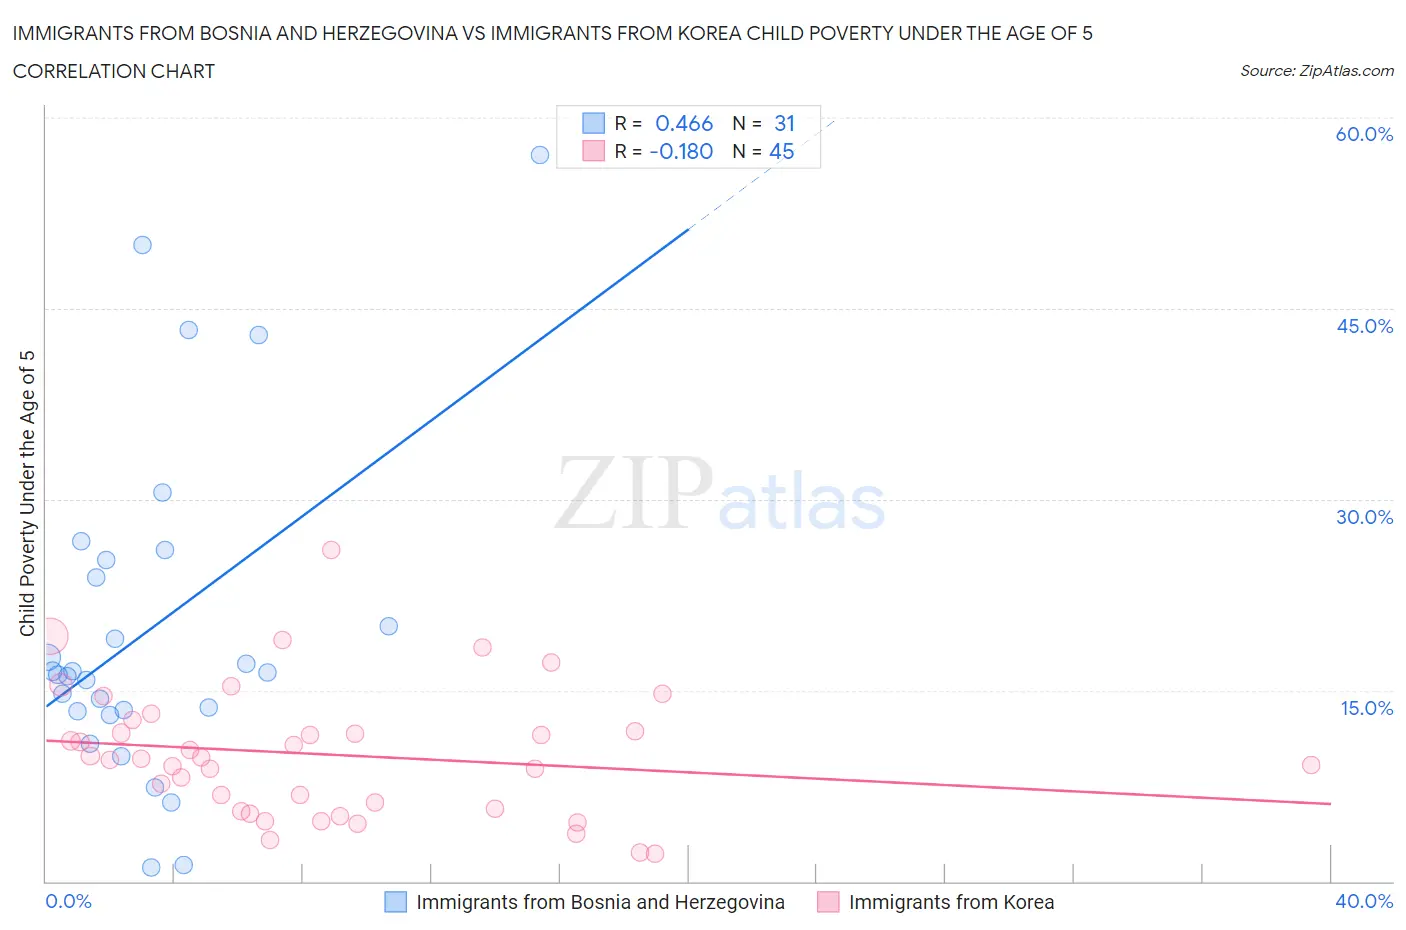 Immigrants from Bosnia and Herzegovina vs Immigrants from Korea Child Poverty Under the Age of 5